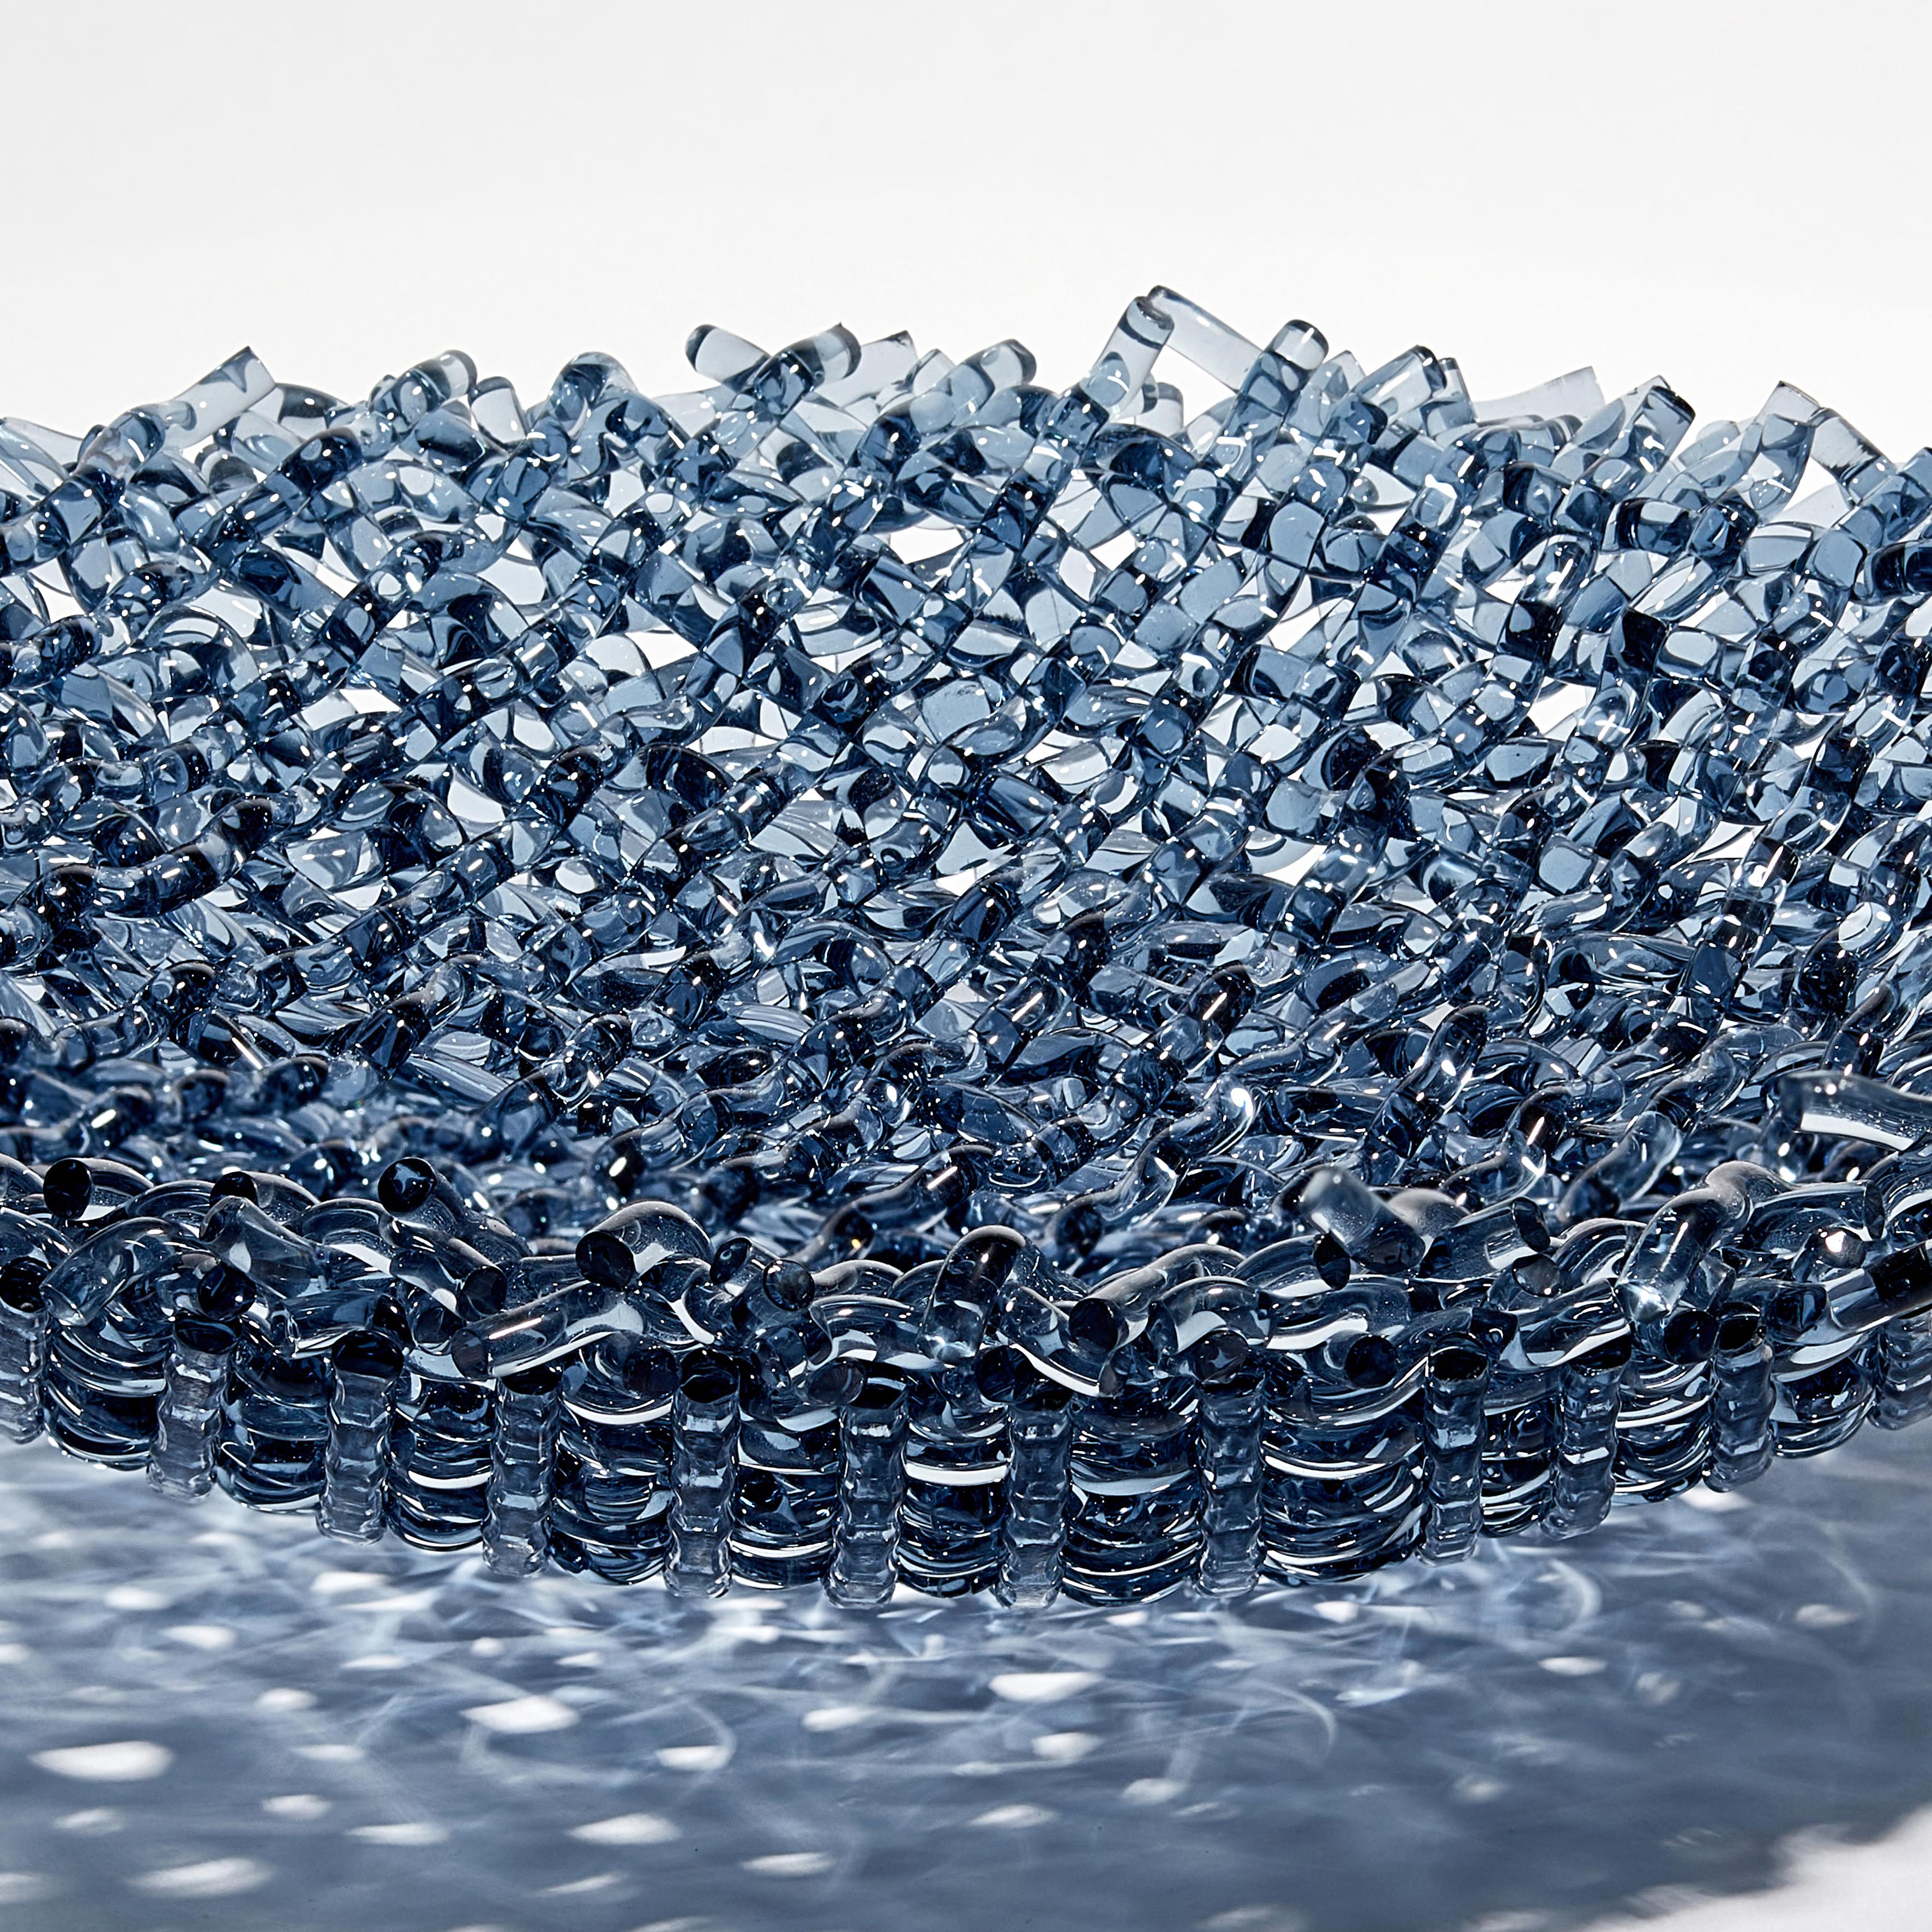 Organic Modern Meltwater, a Unique Woven Blue Glass Sculptural Centrepiece by Cathryn Shilling